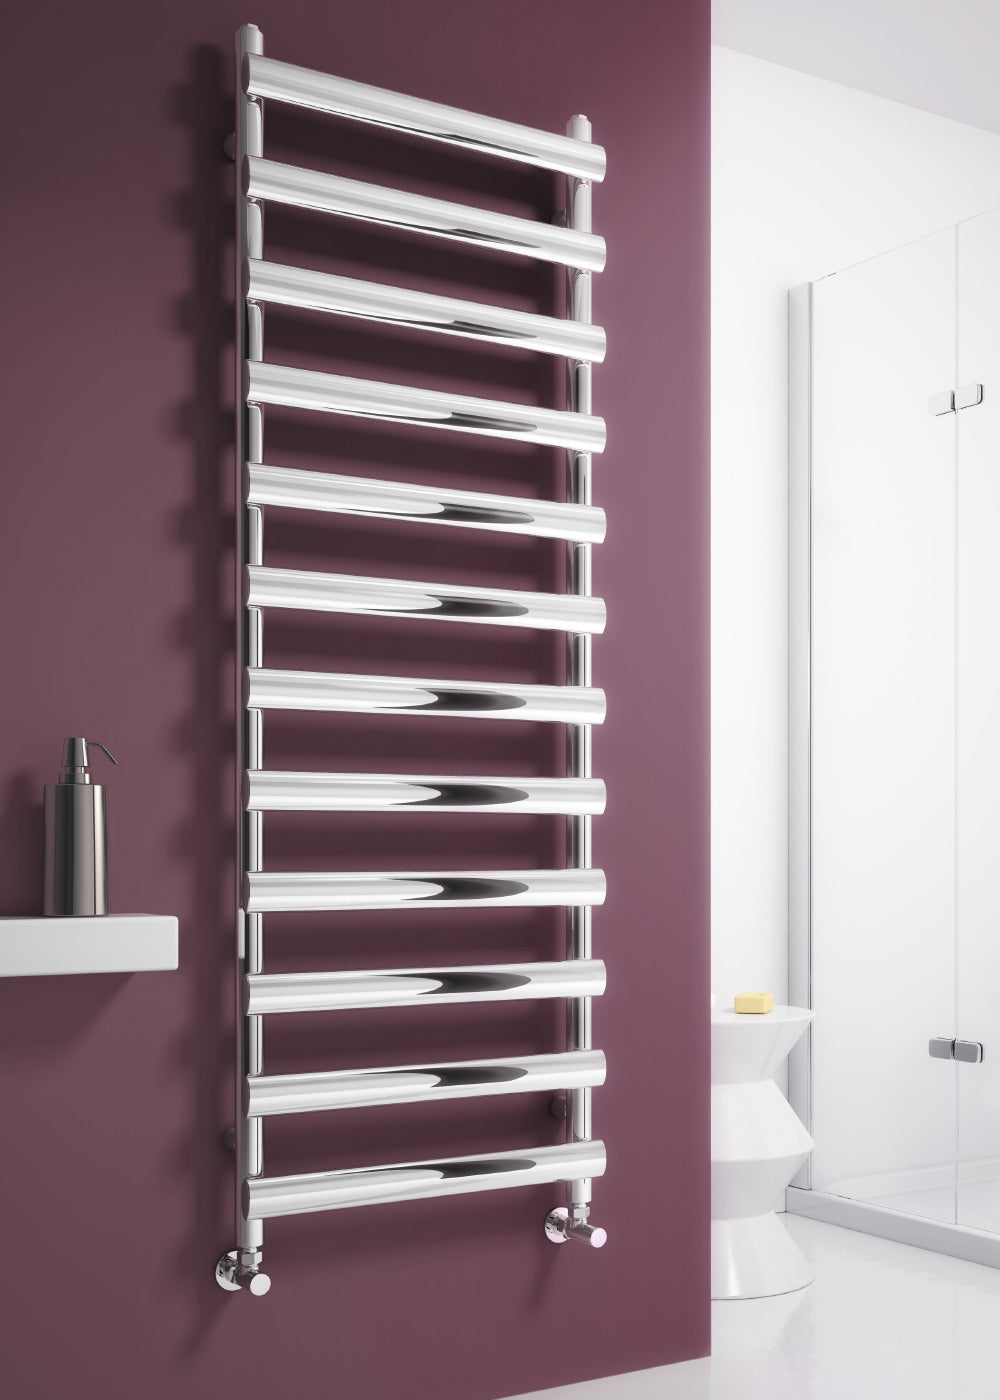 Deno Electric Stainless Steel Heated Towel Rail - Various Sizes - Polished Stainless Steel